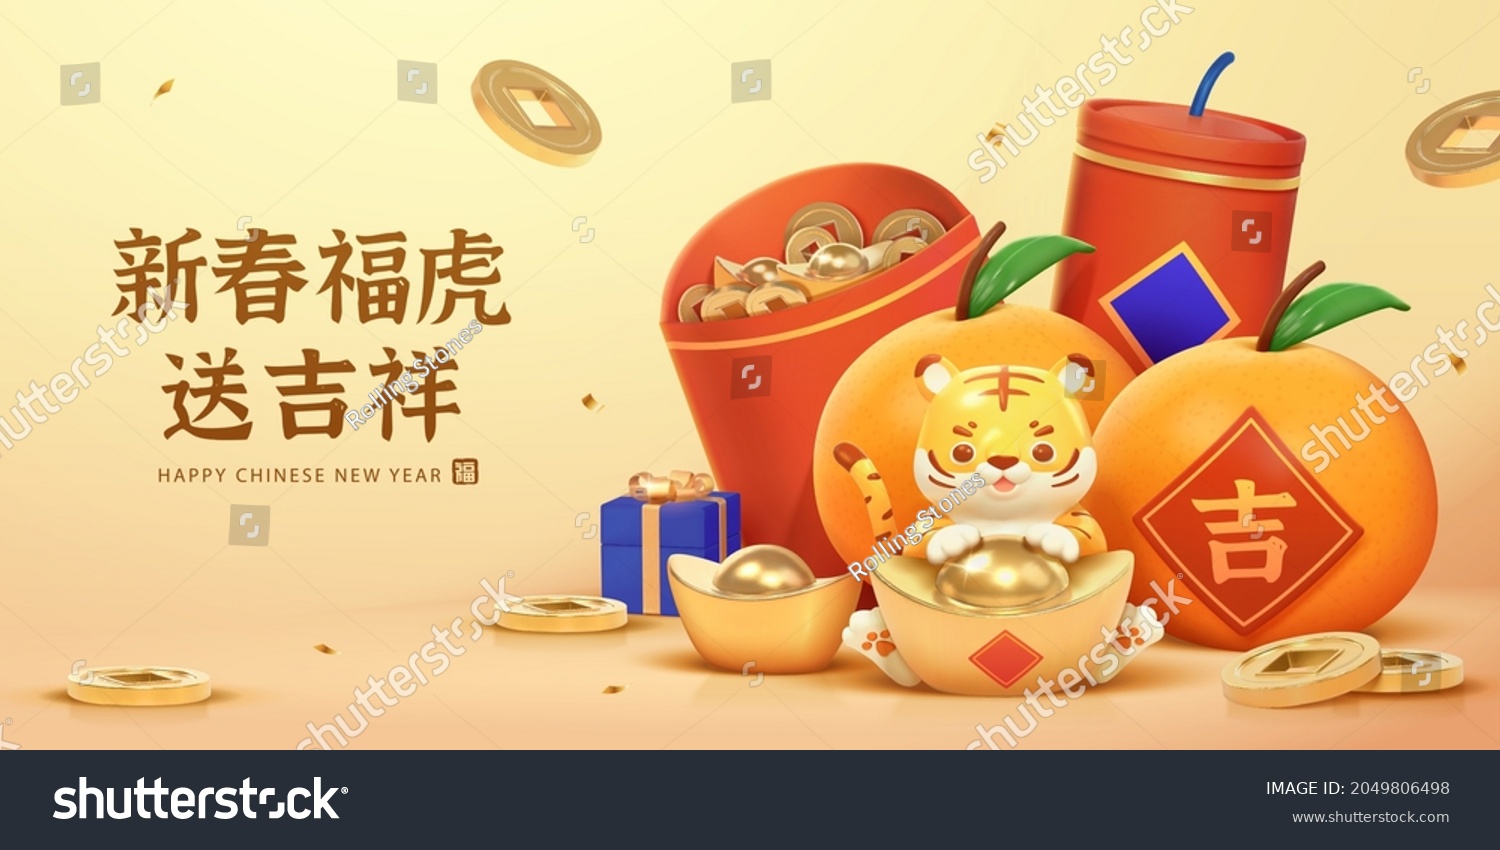 3d Year of the Tiger greeting card. A tiger putting its paws on gold ingot with plenty of fortunes behind him. Sending auspiciousness on the coming New Year written on left side and spring couplet  #2049806498